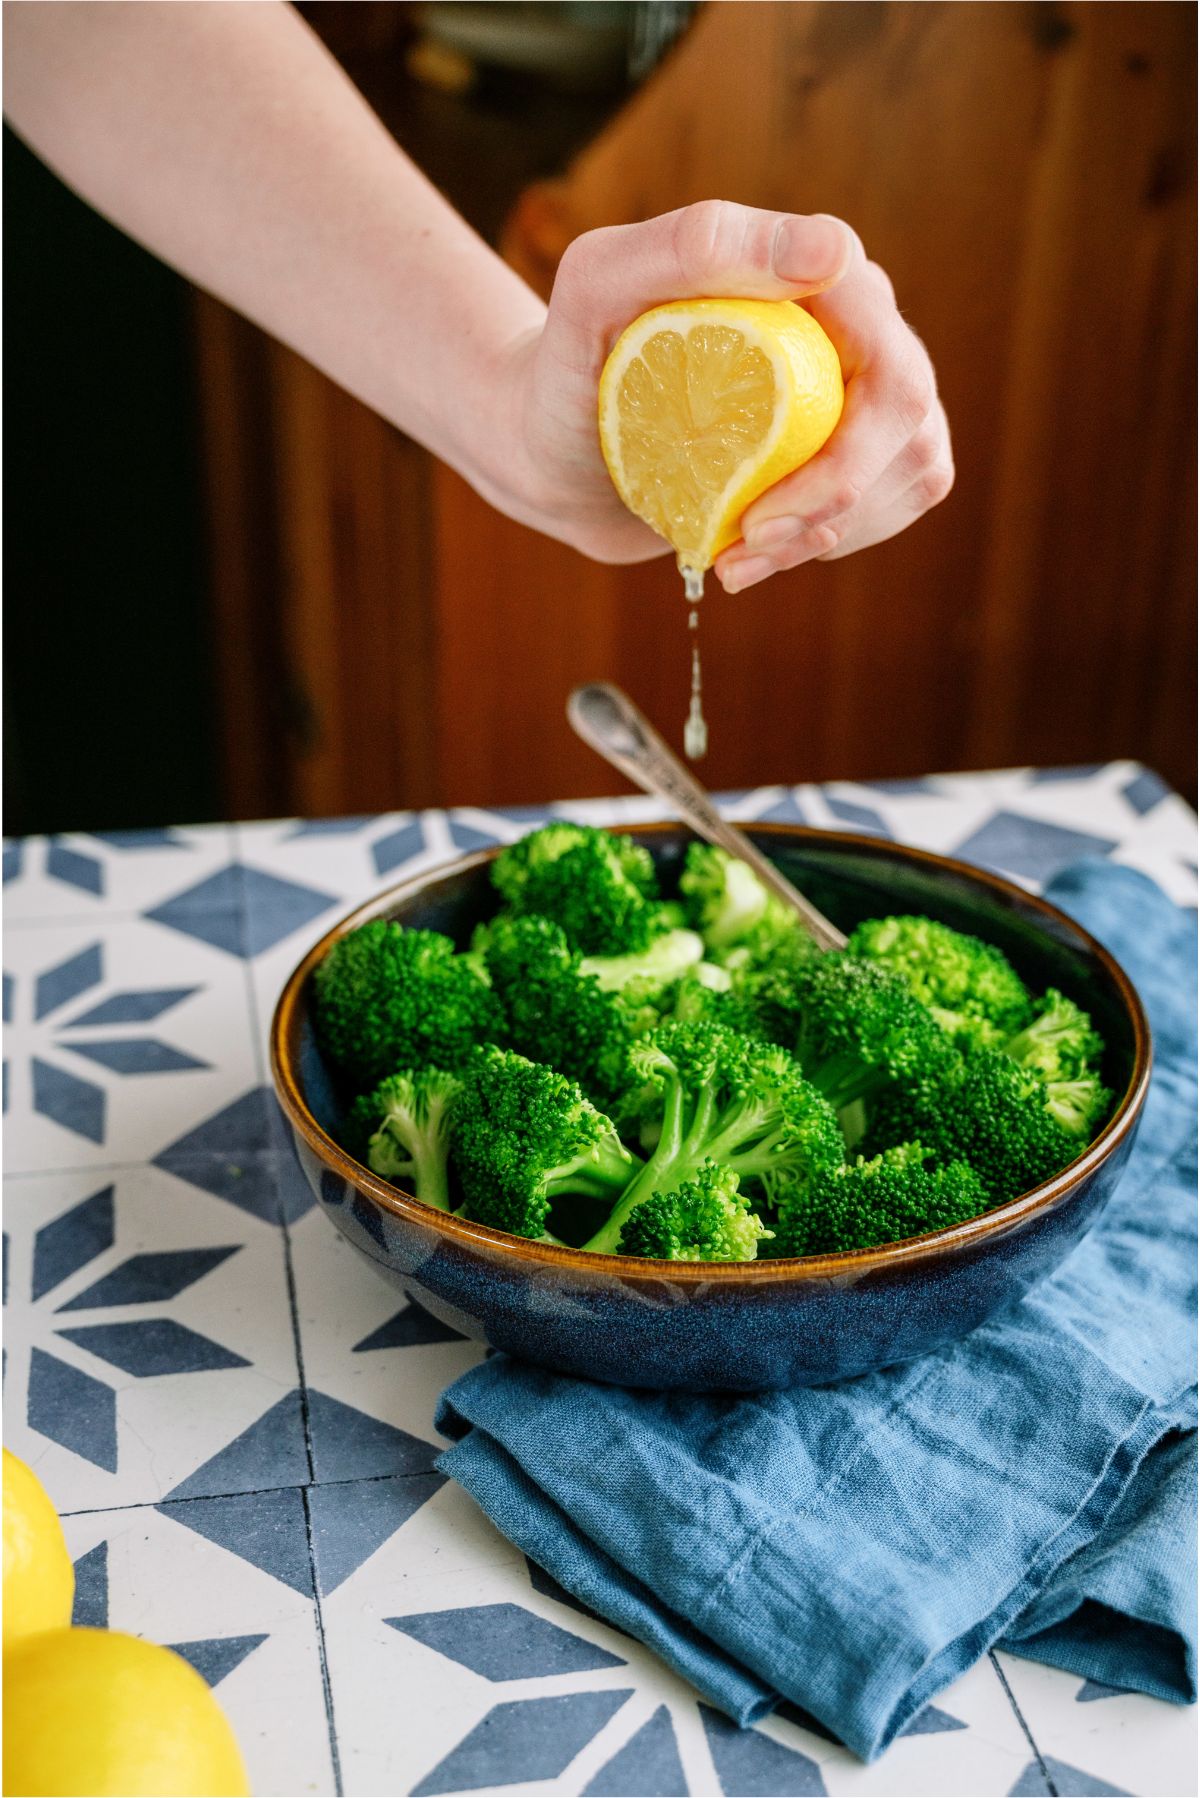 Squeezing fresh lemon on top of Steamed Broccoli